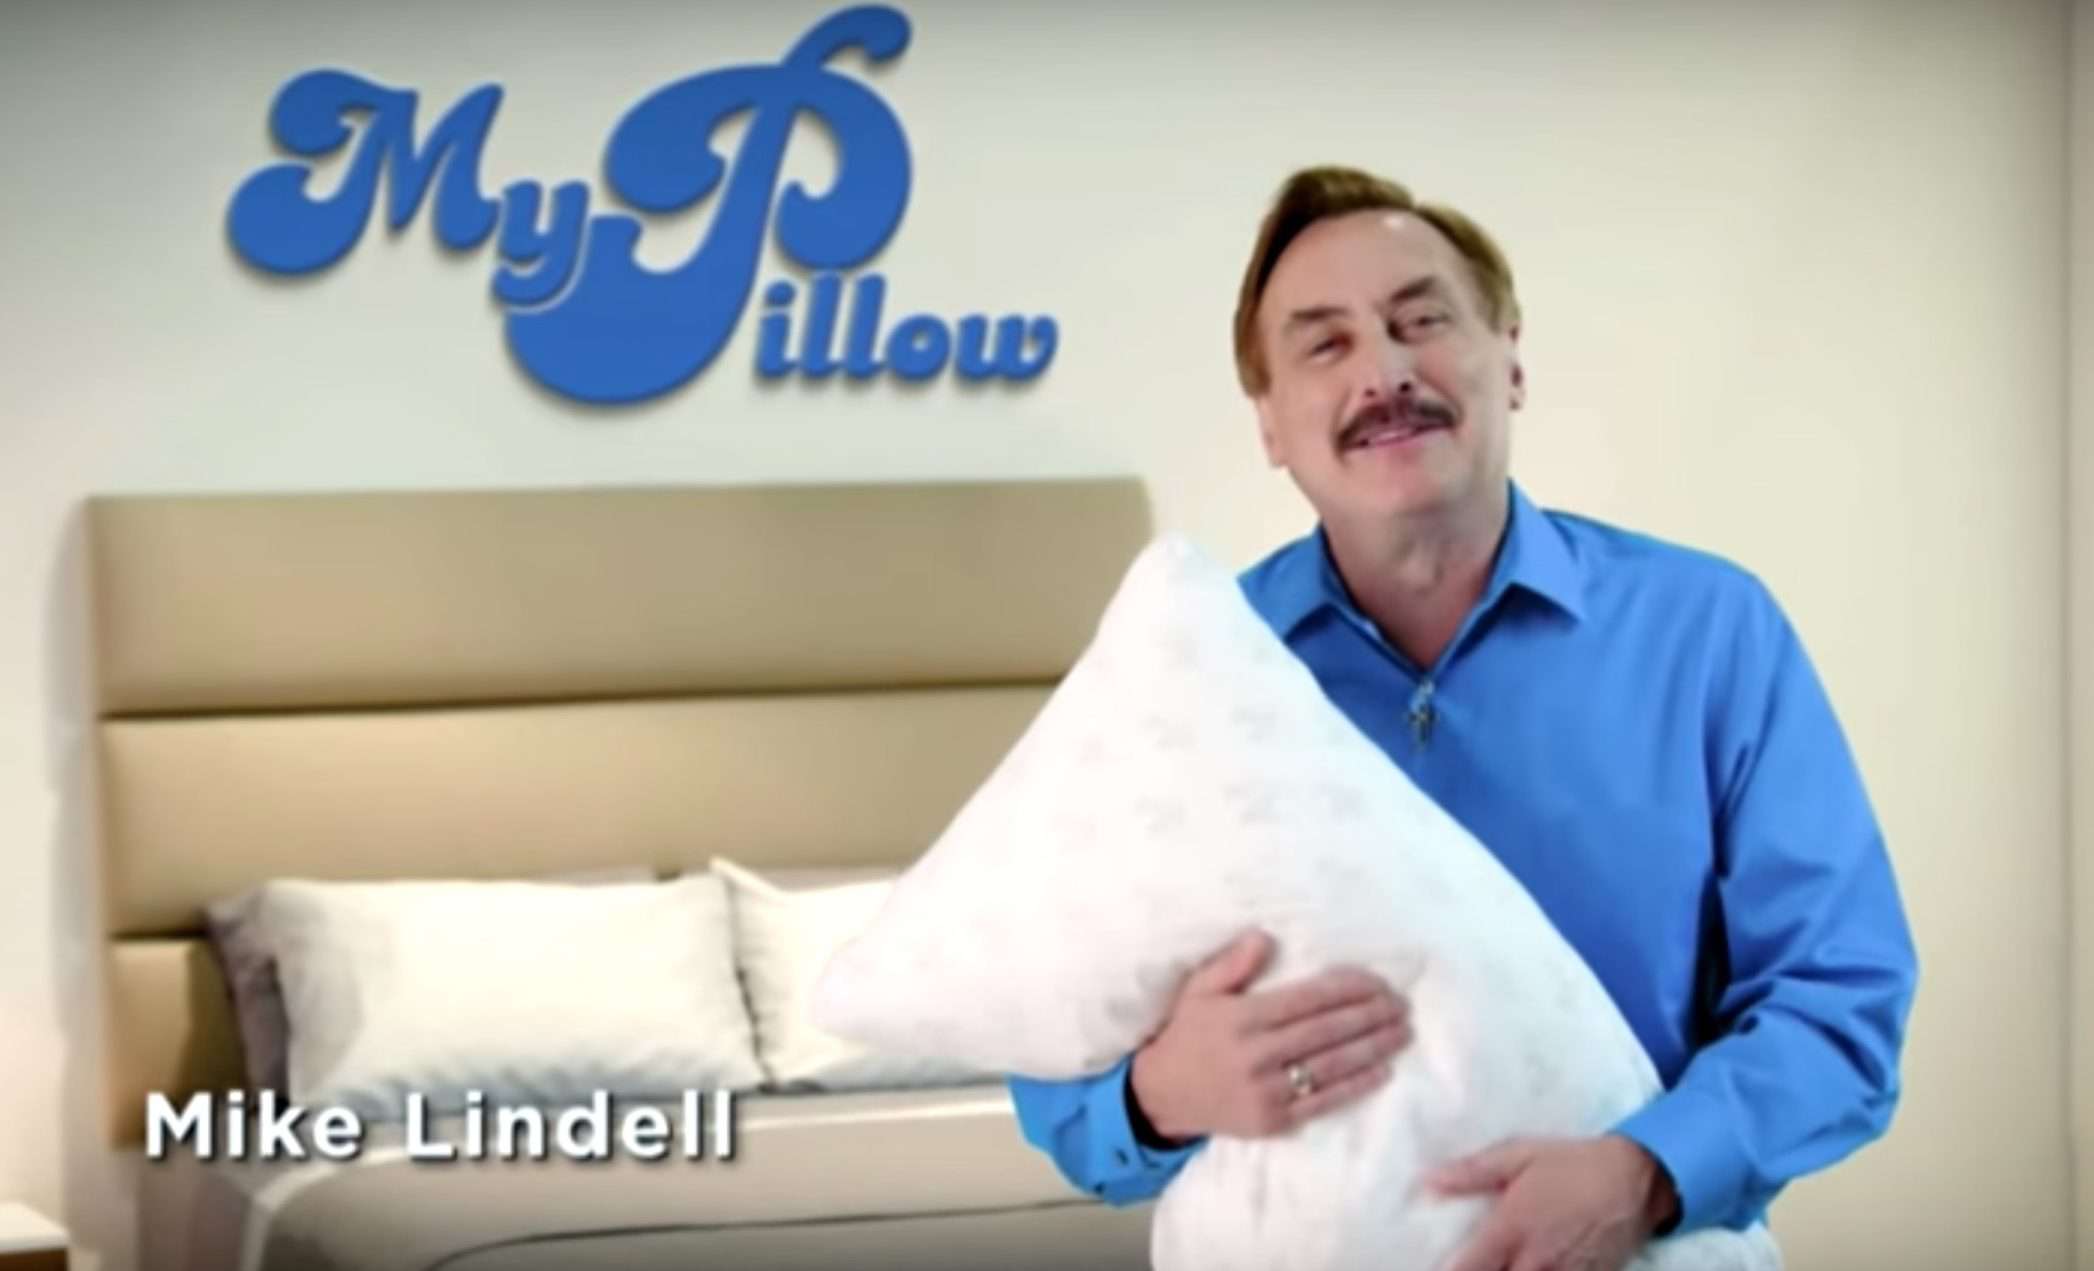 RevContent Ad Example 50510 - MyPillow Lays Off 150 Employees, Just Months After Founder Lauds Trump Economic Policies